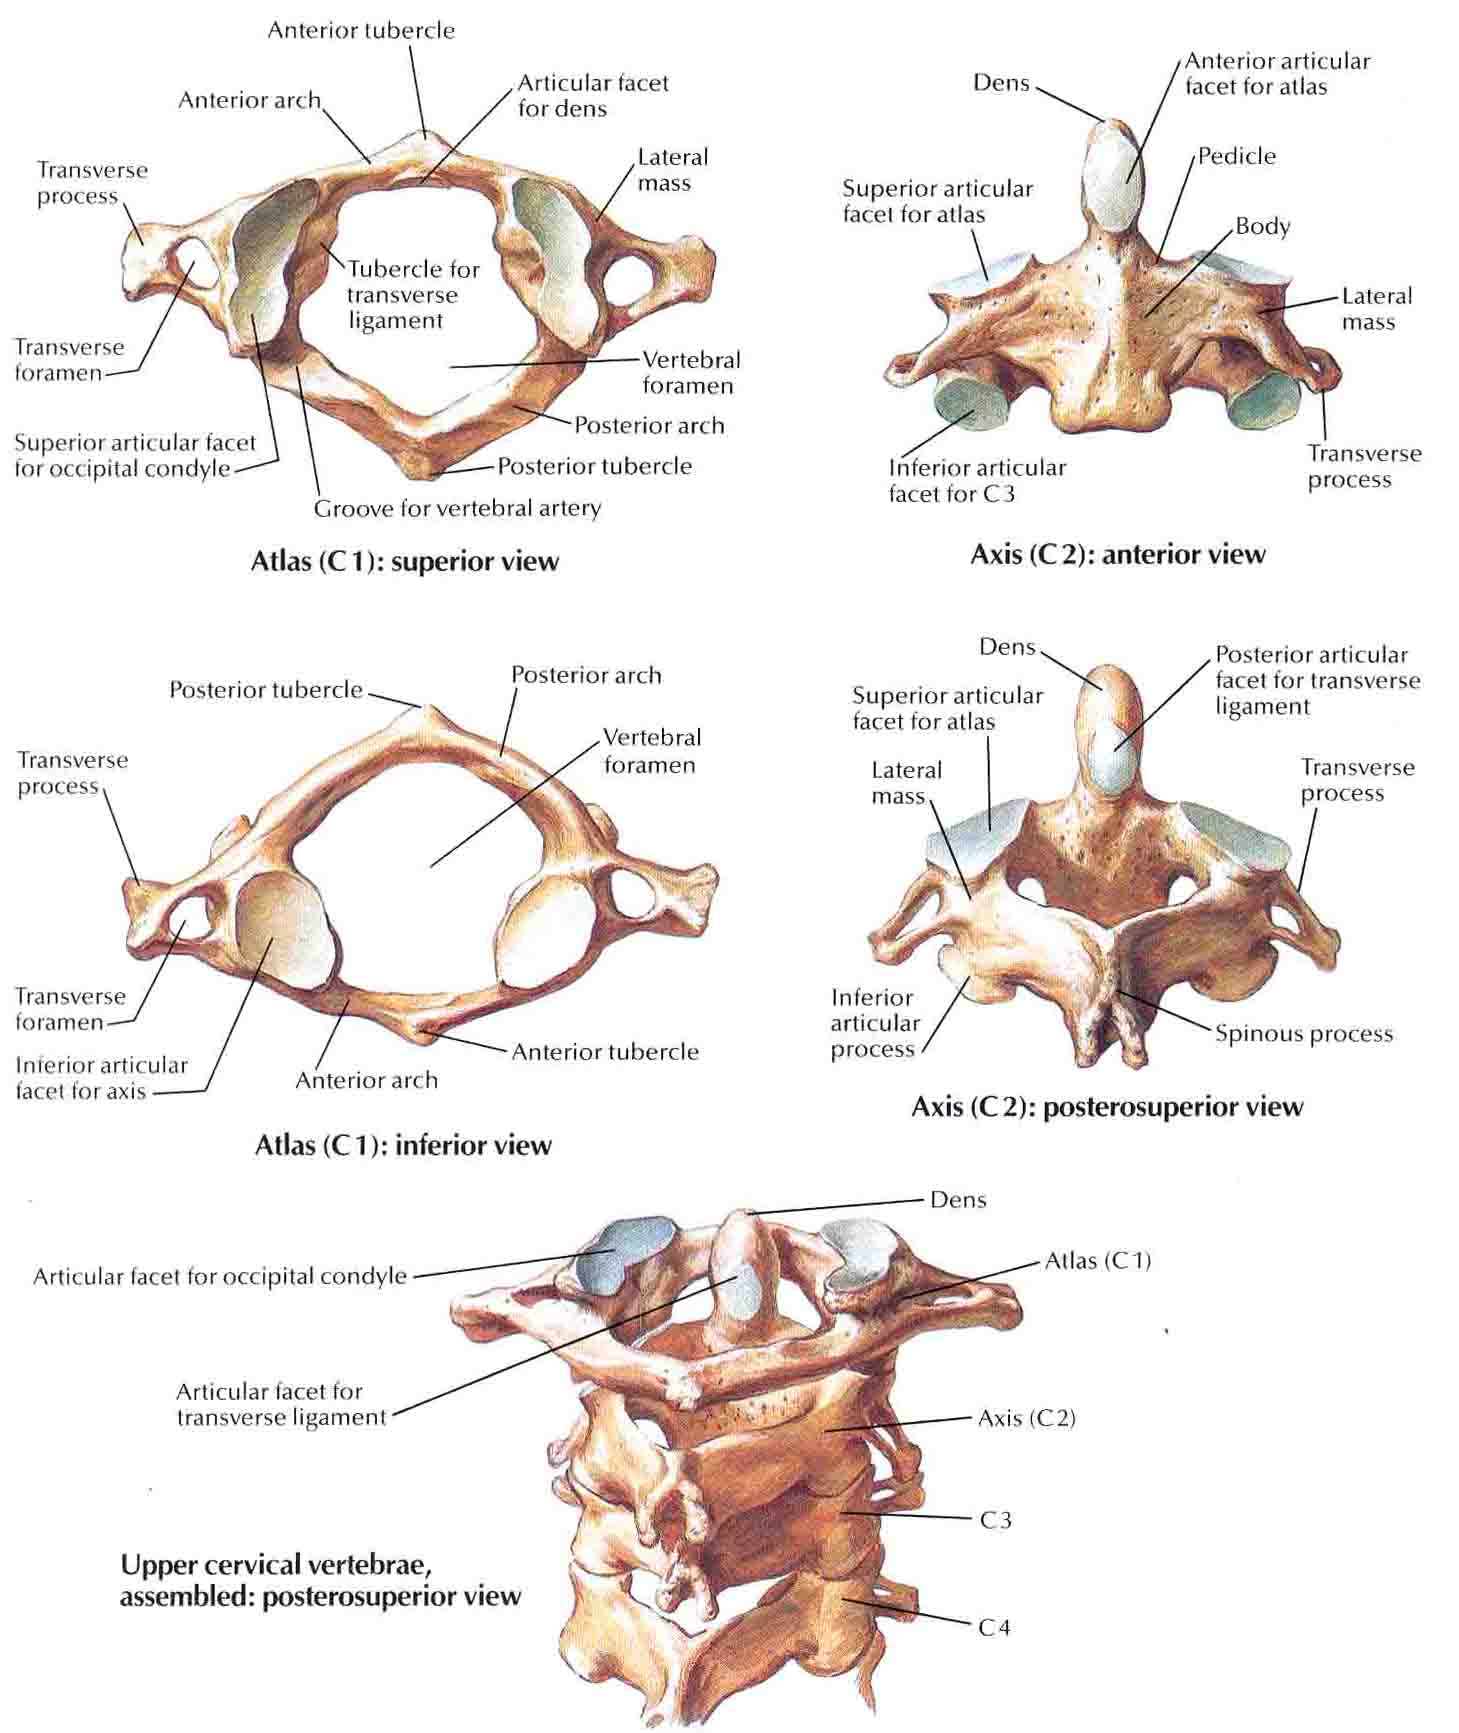 Image Cervical Vertebrae Atlas And Axis1 Ranzcrpart1 Wiki